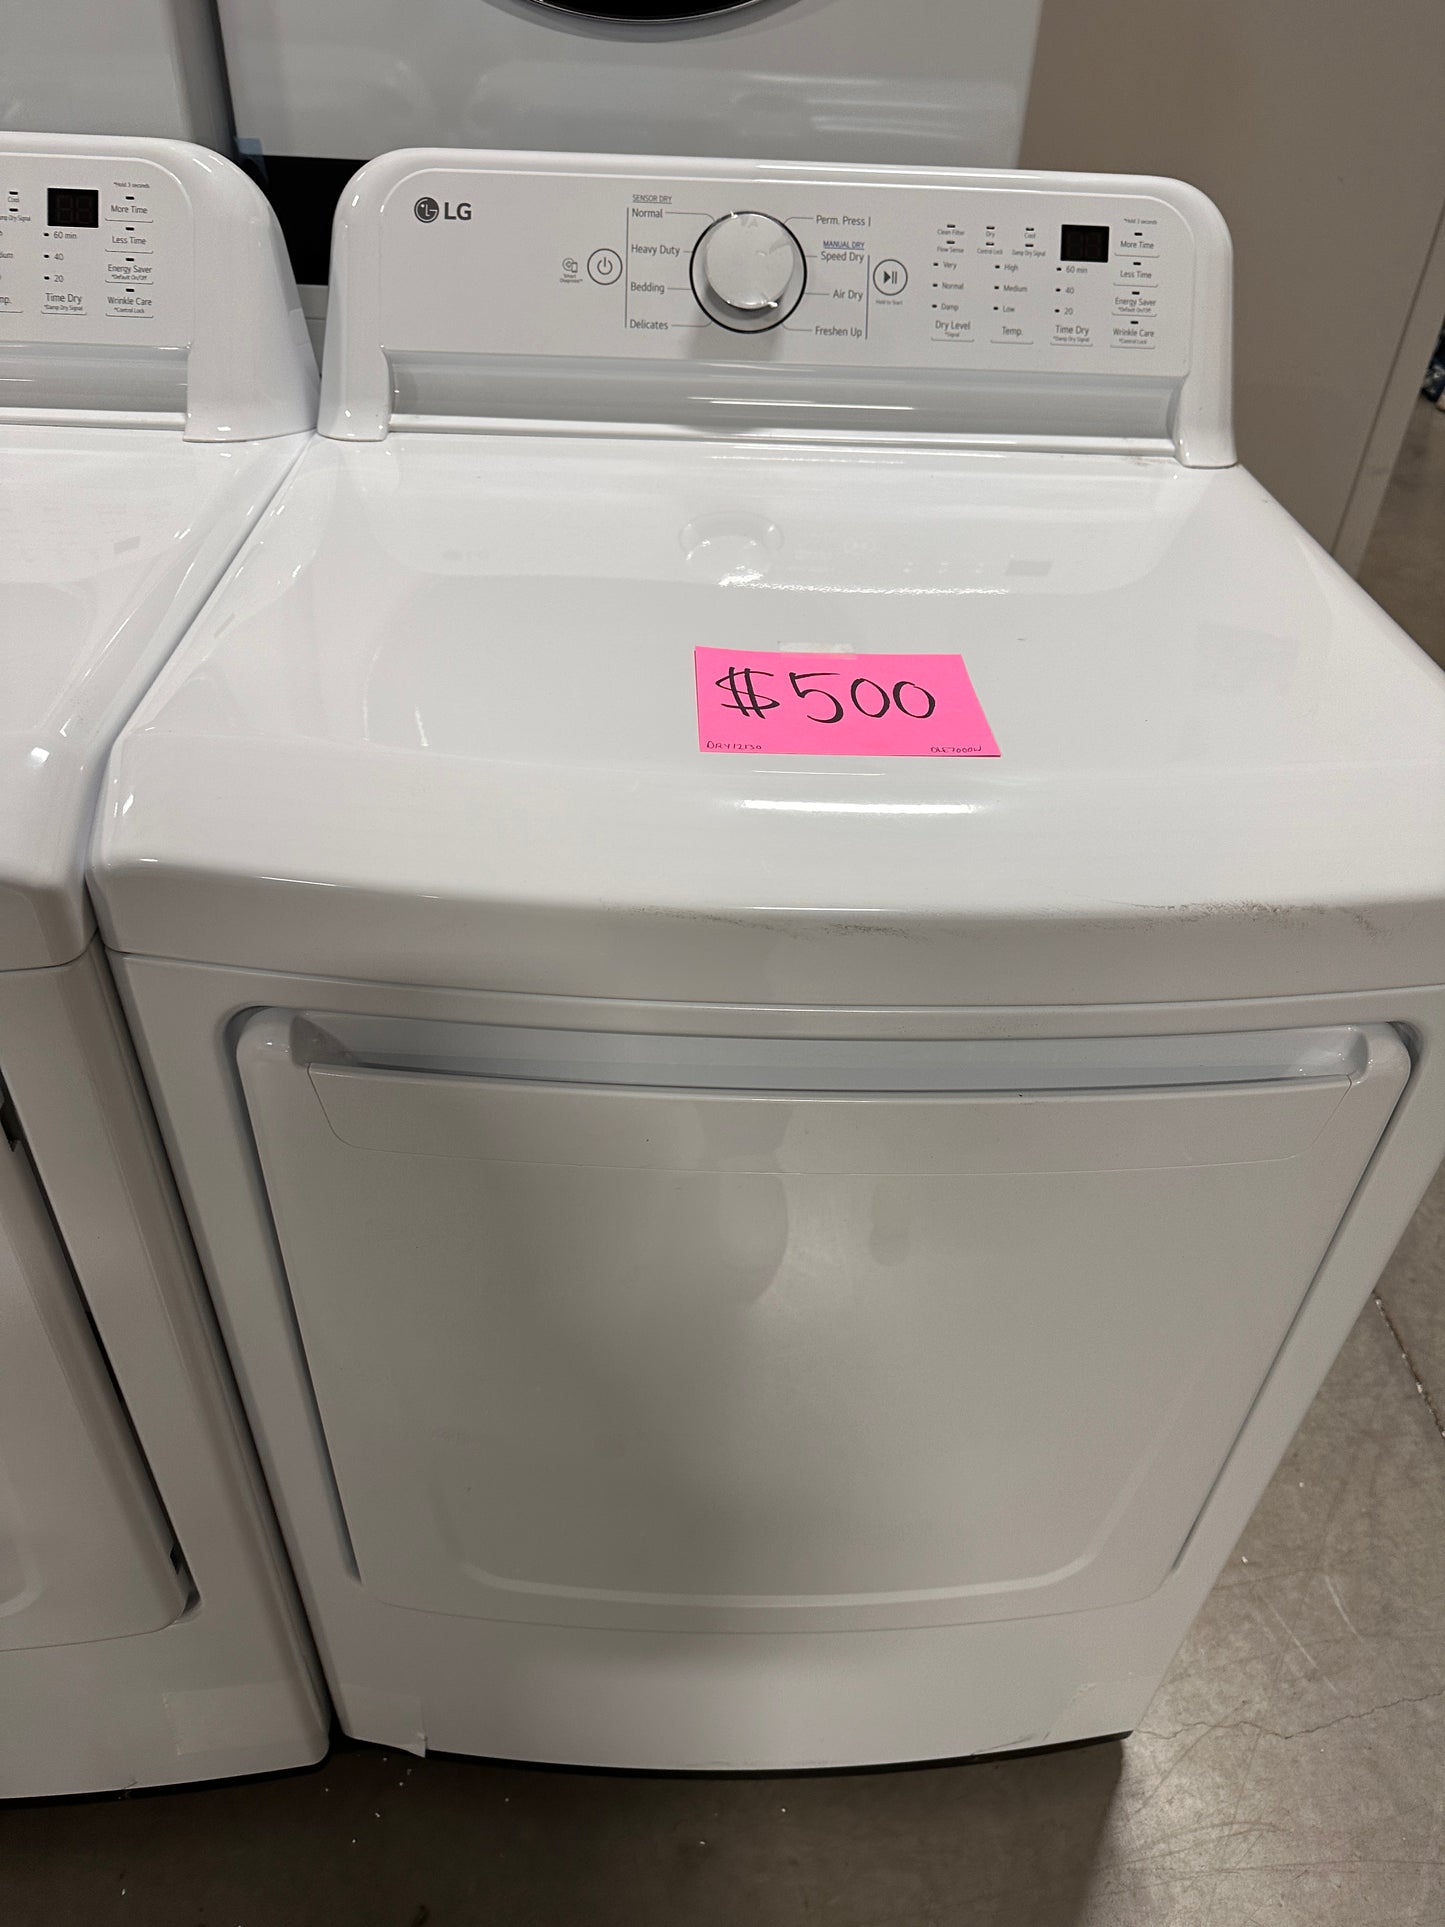 GORGEOUS NEW LG ELECTRIC DRYER with SENSOR DRY - DRY12130